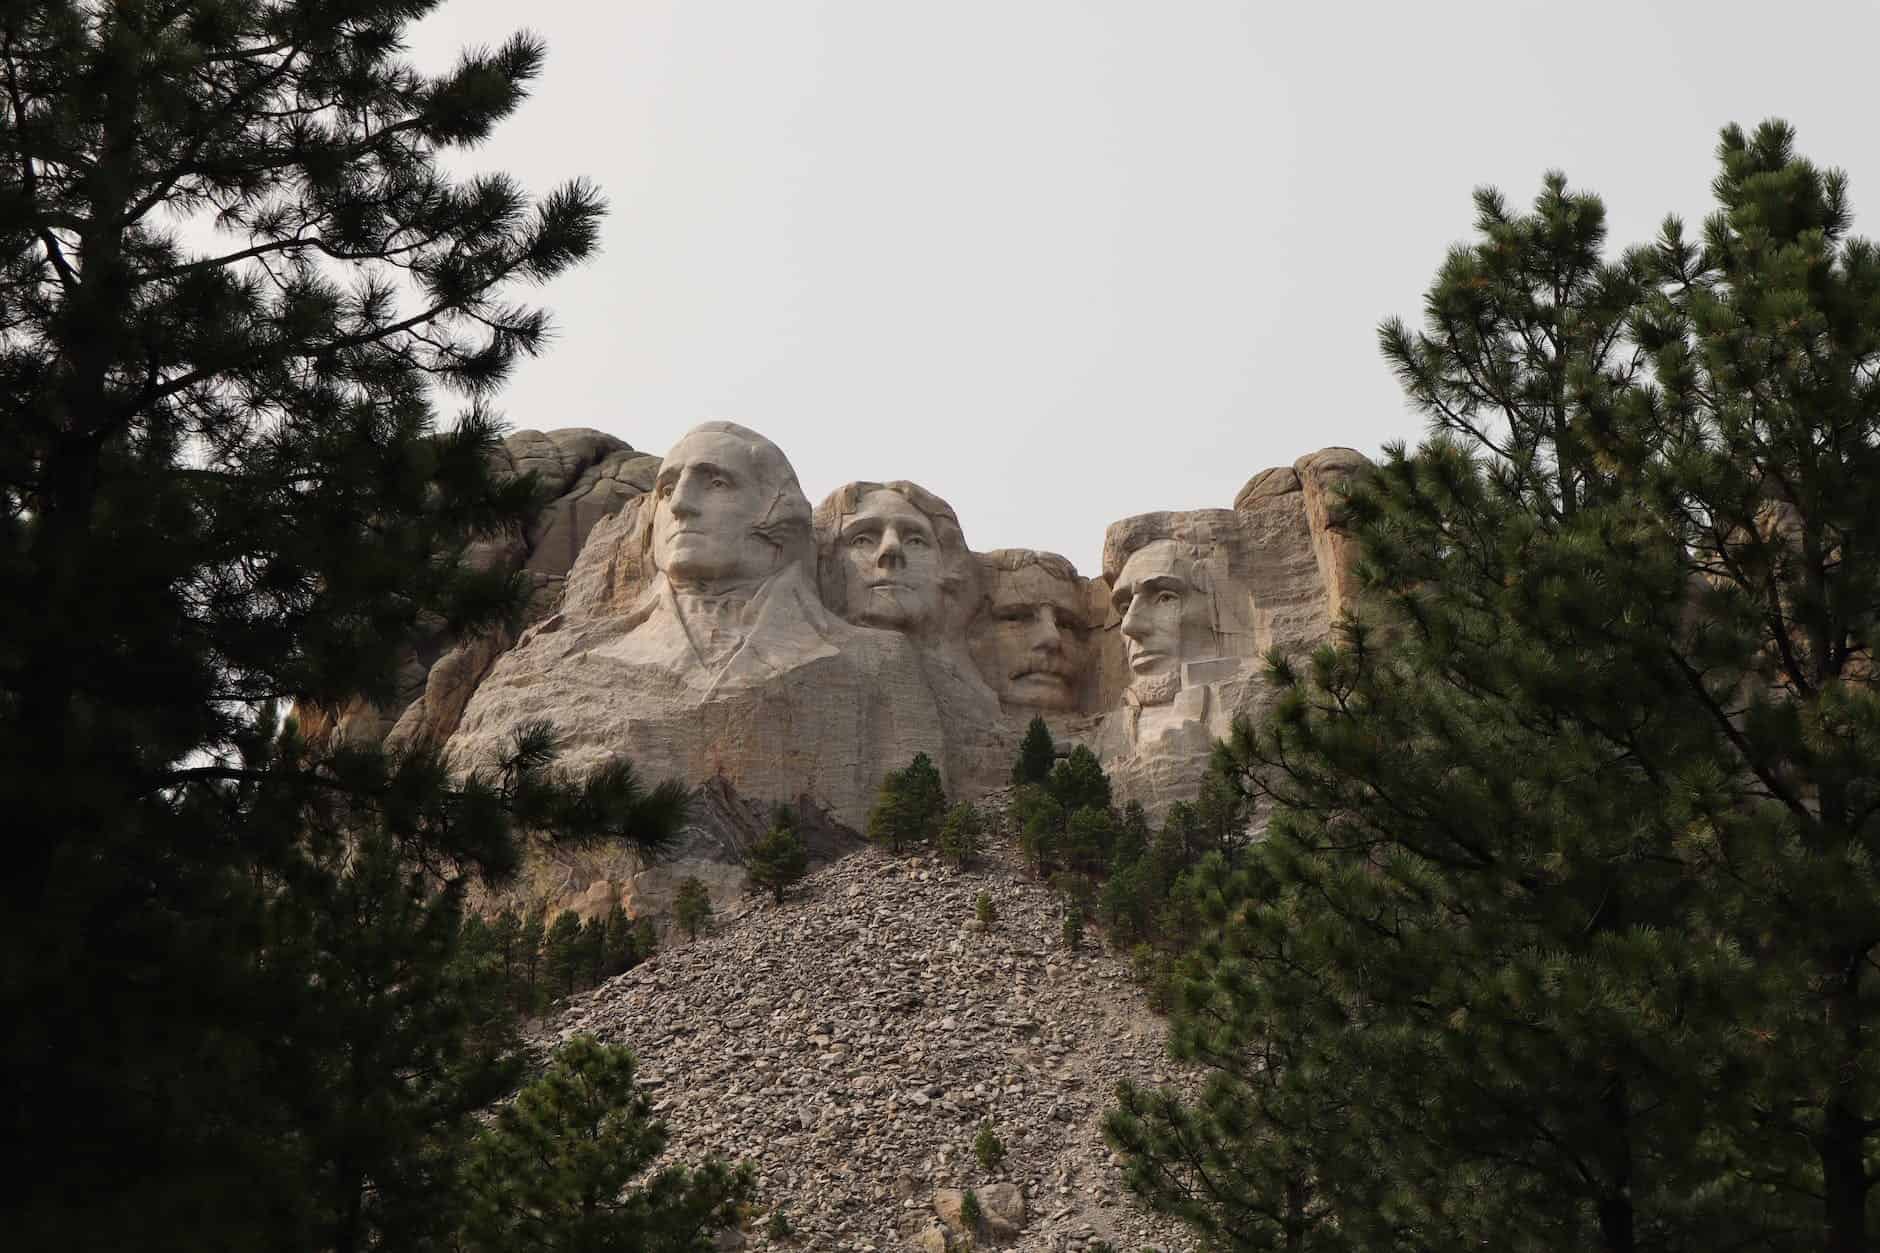 faces of four usa presidents carved in rocks of mount rushmore